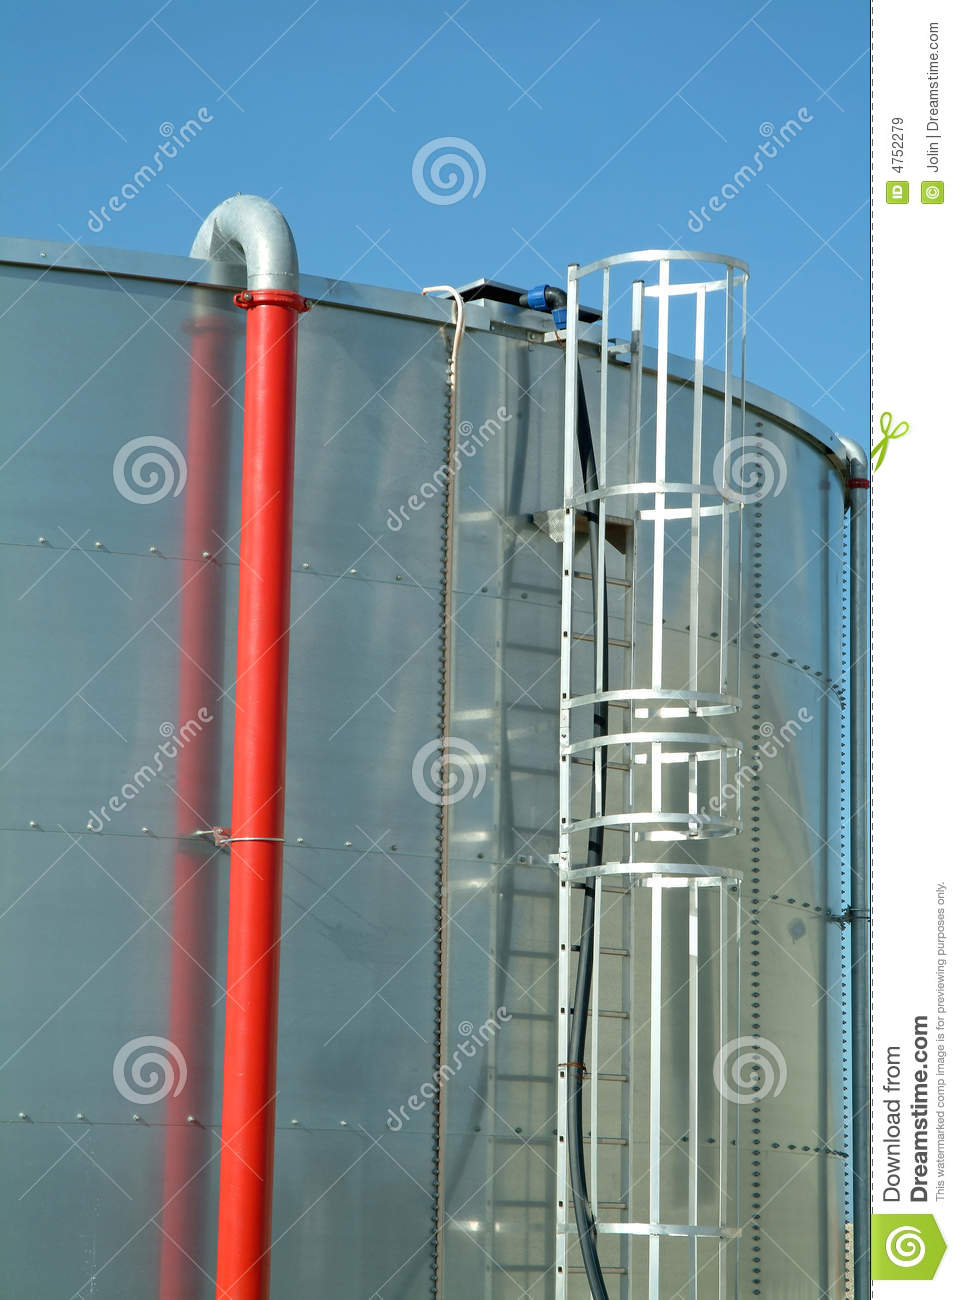 Stainless Steel Industrial Oil Reservoir Royalty Free Stock Images